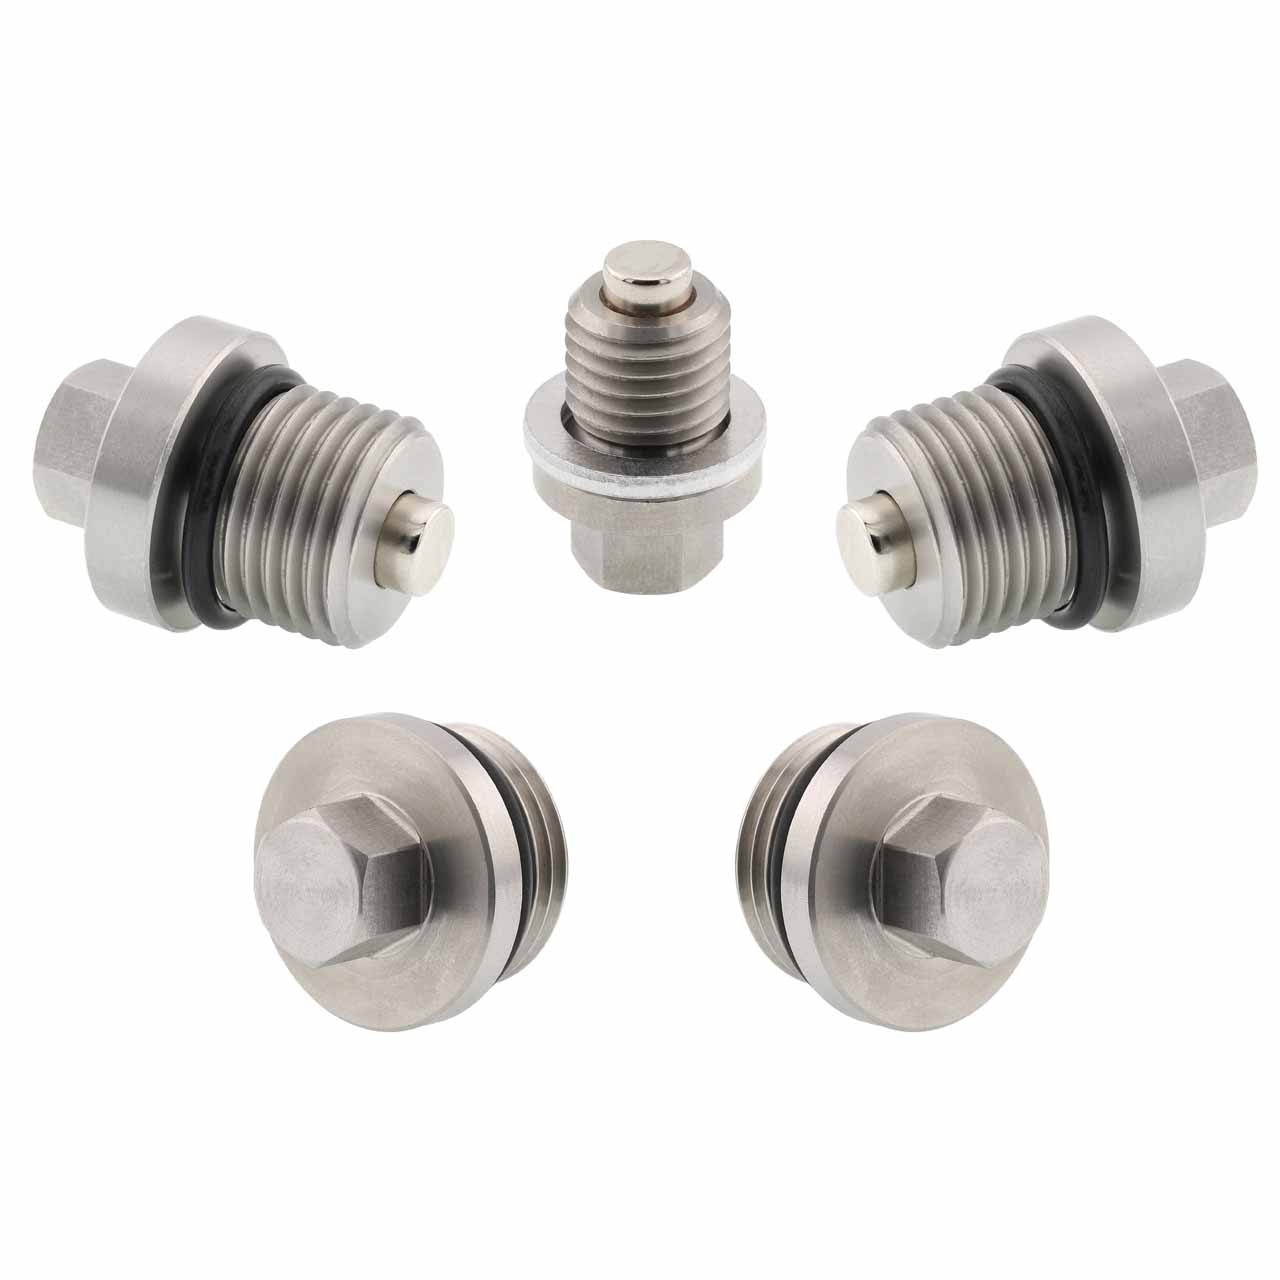 Polaris General / Rzr / Ranger Stainless Steel Magnetic Oil Drain Plug Kit - Differential/Engine/Transmission - MADE IN USA